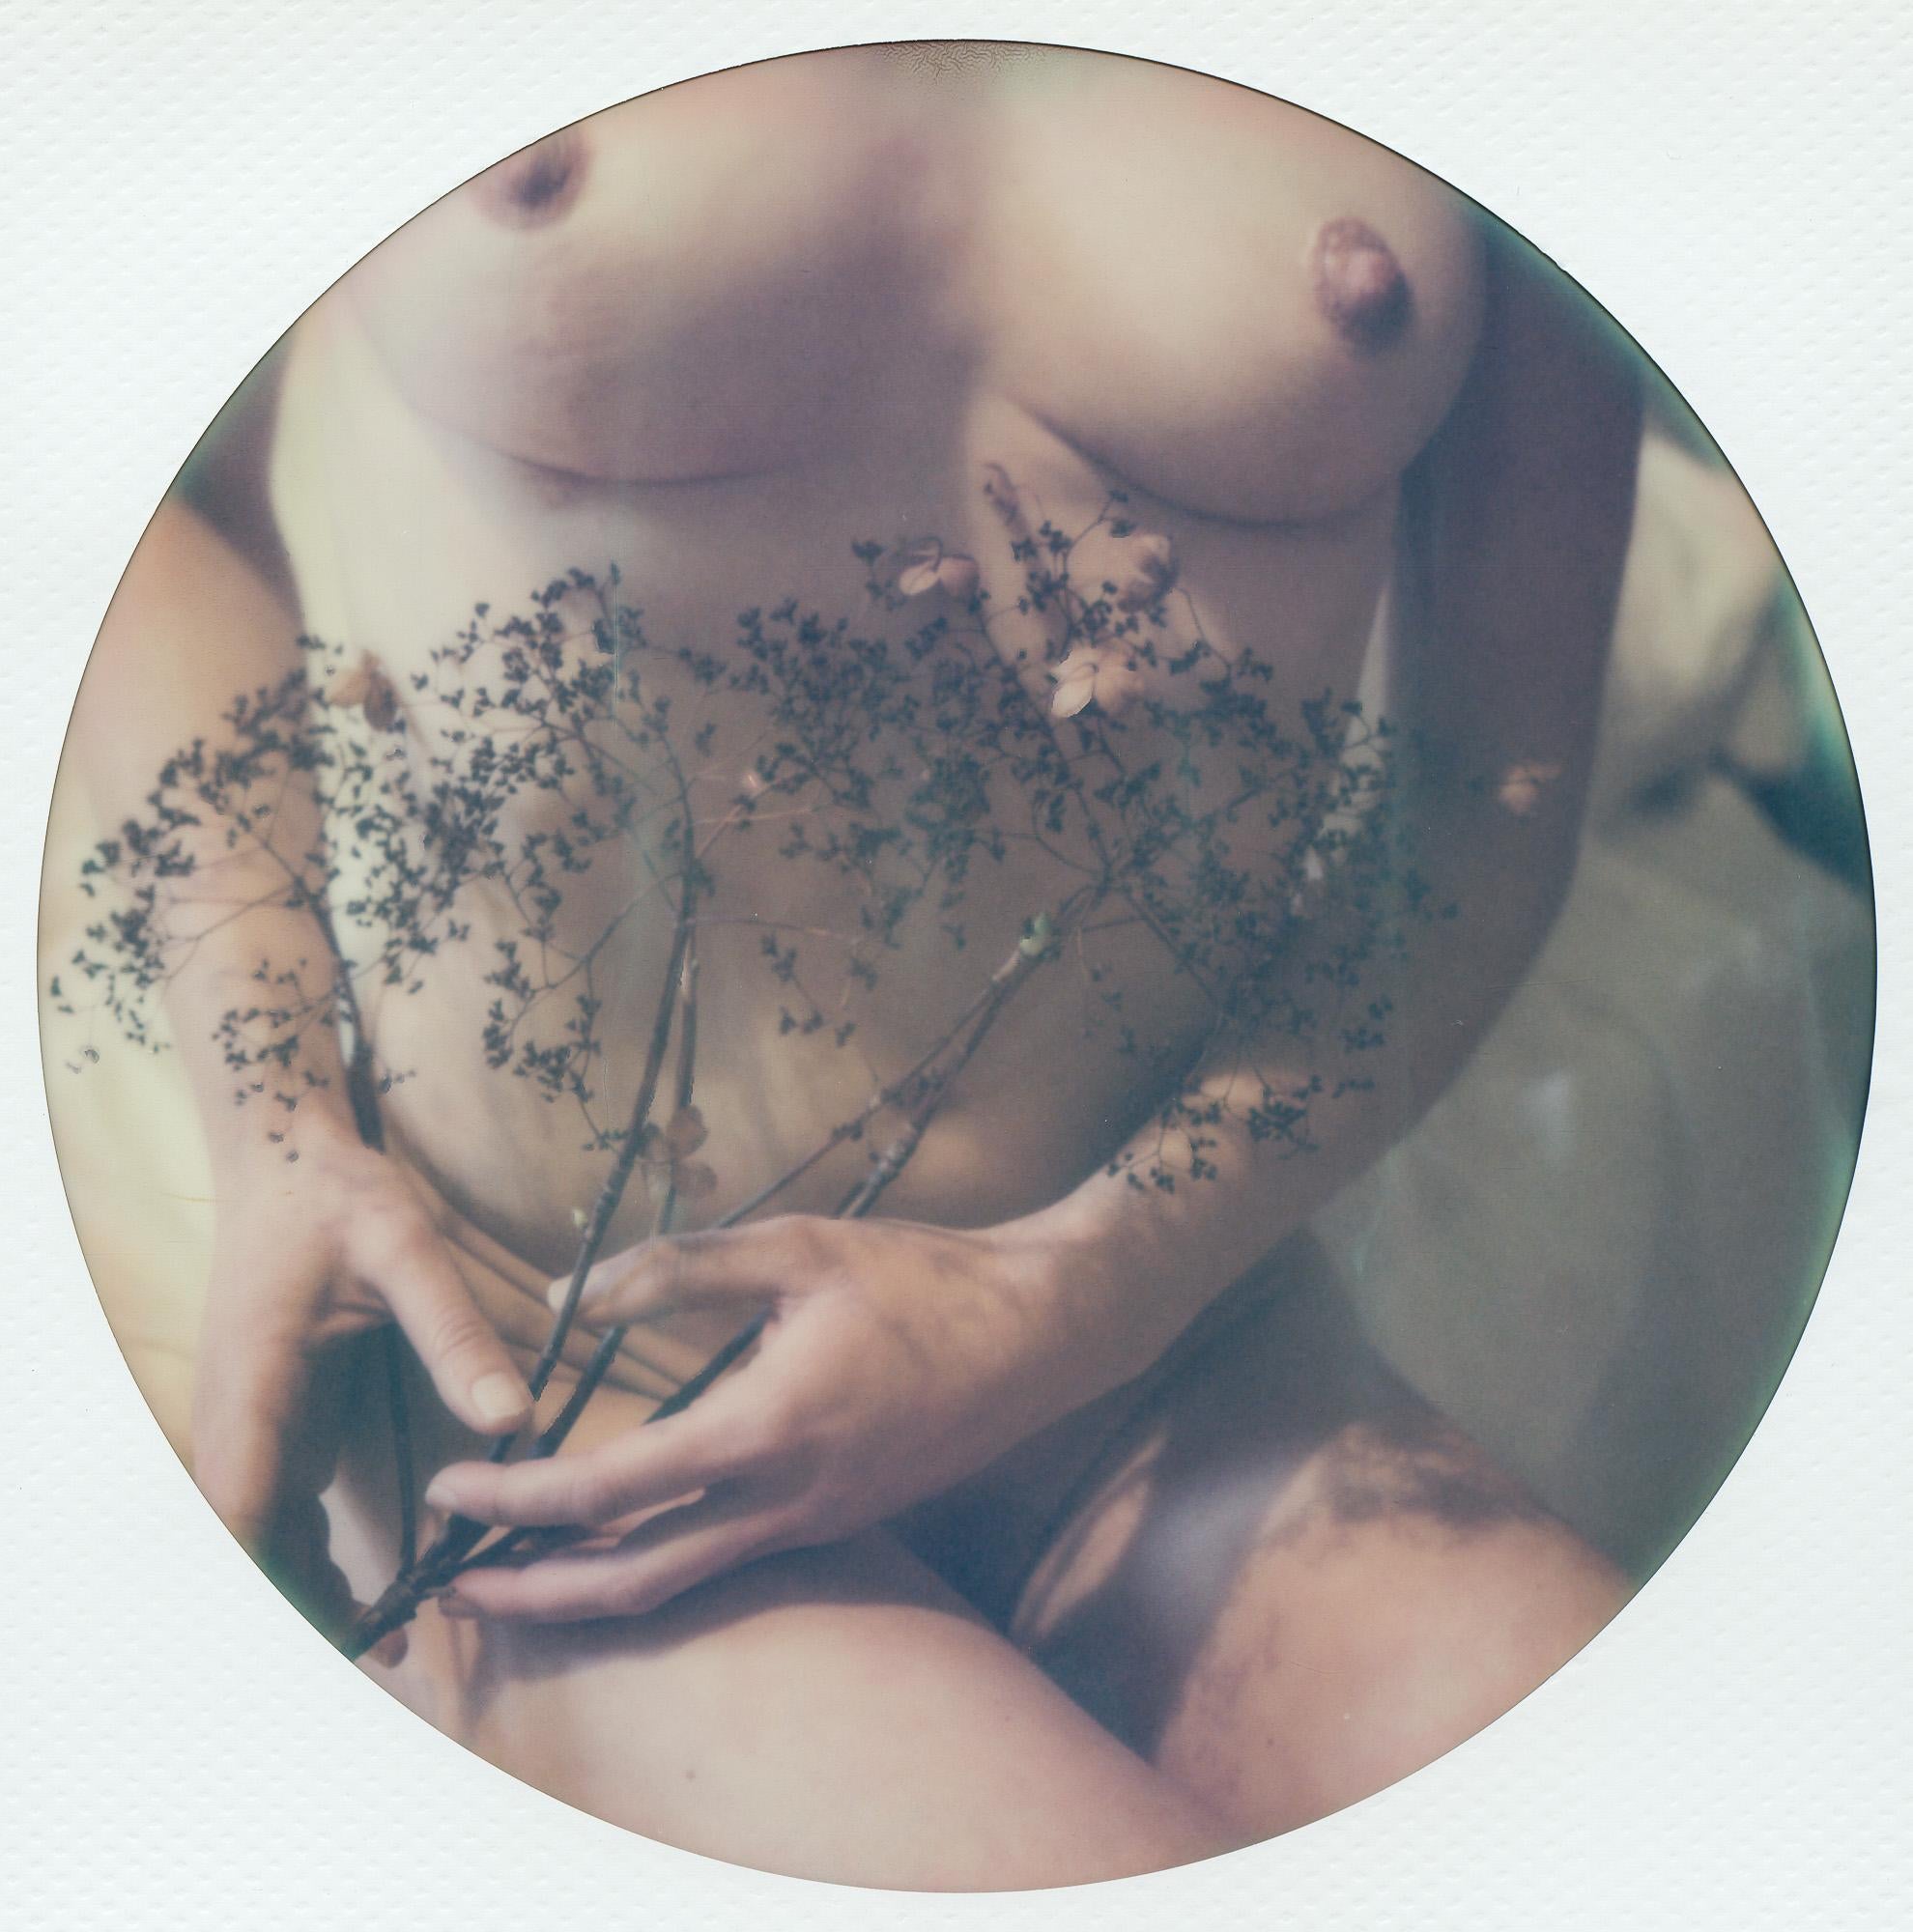 Lap Dance with Light, 21st Century, Polaroid, Nude Photography, Contemporary